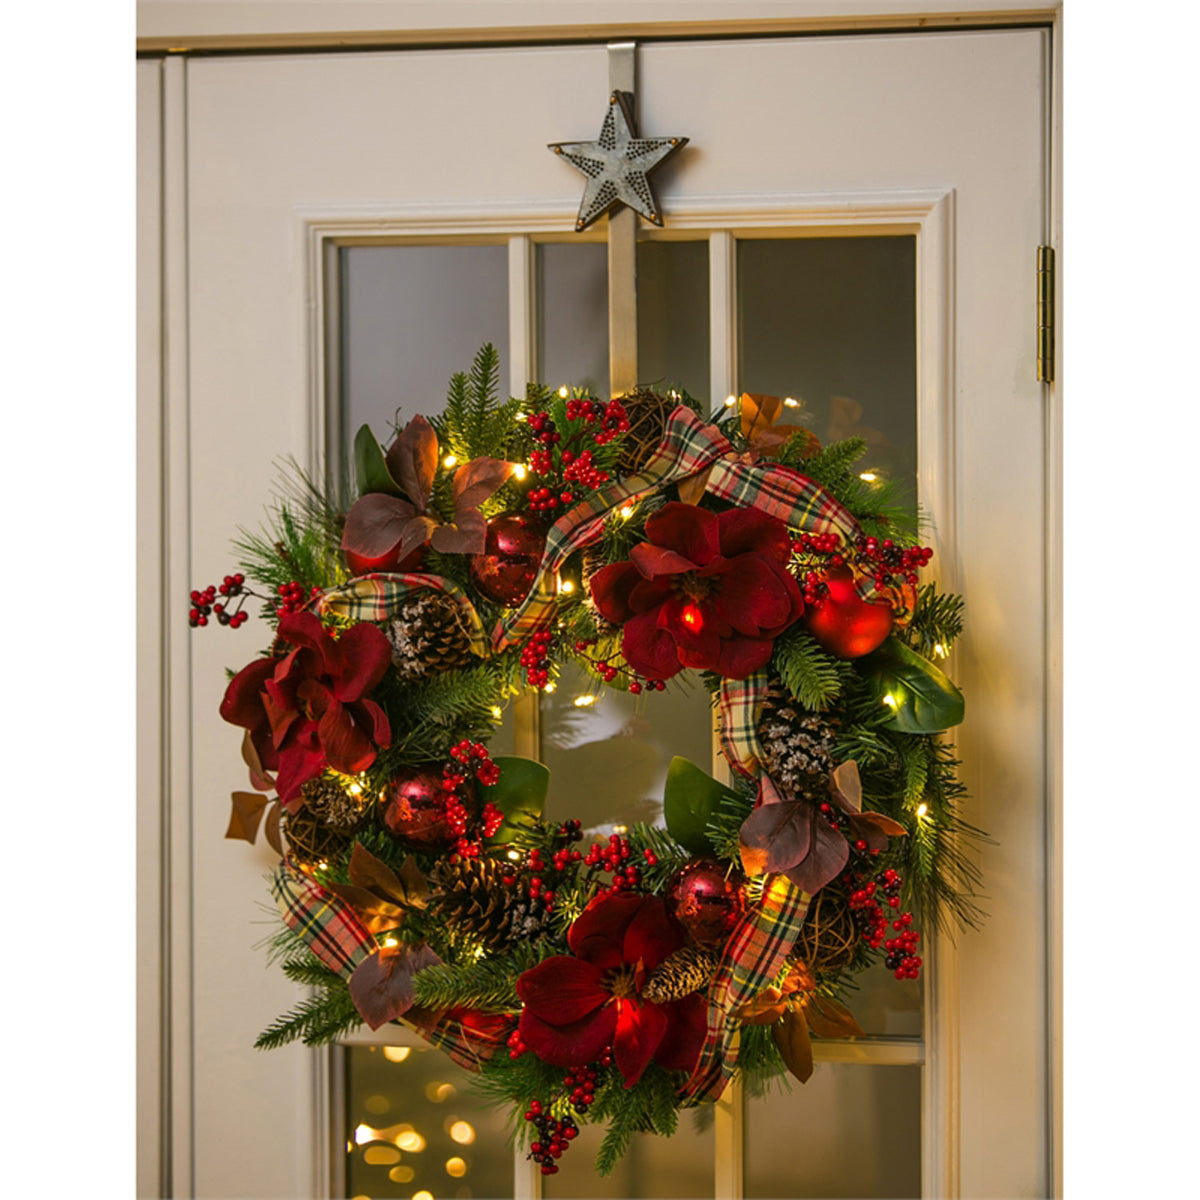 LED Wreath with Plaid Ribbon, Red Ornaments, Berries, and Pine cone 24"